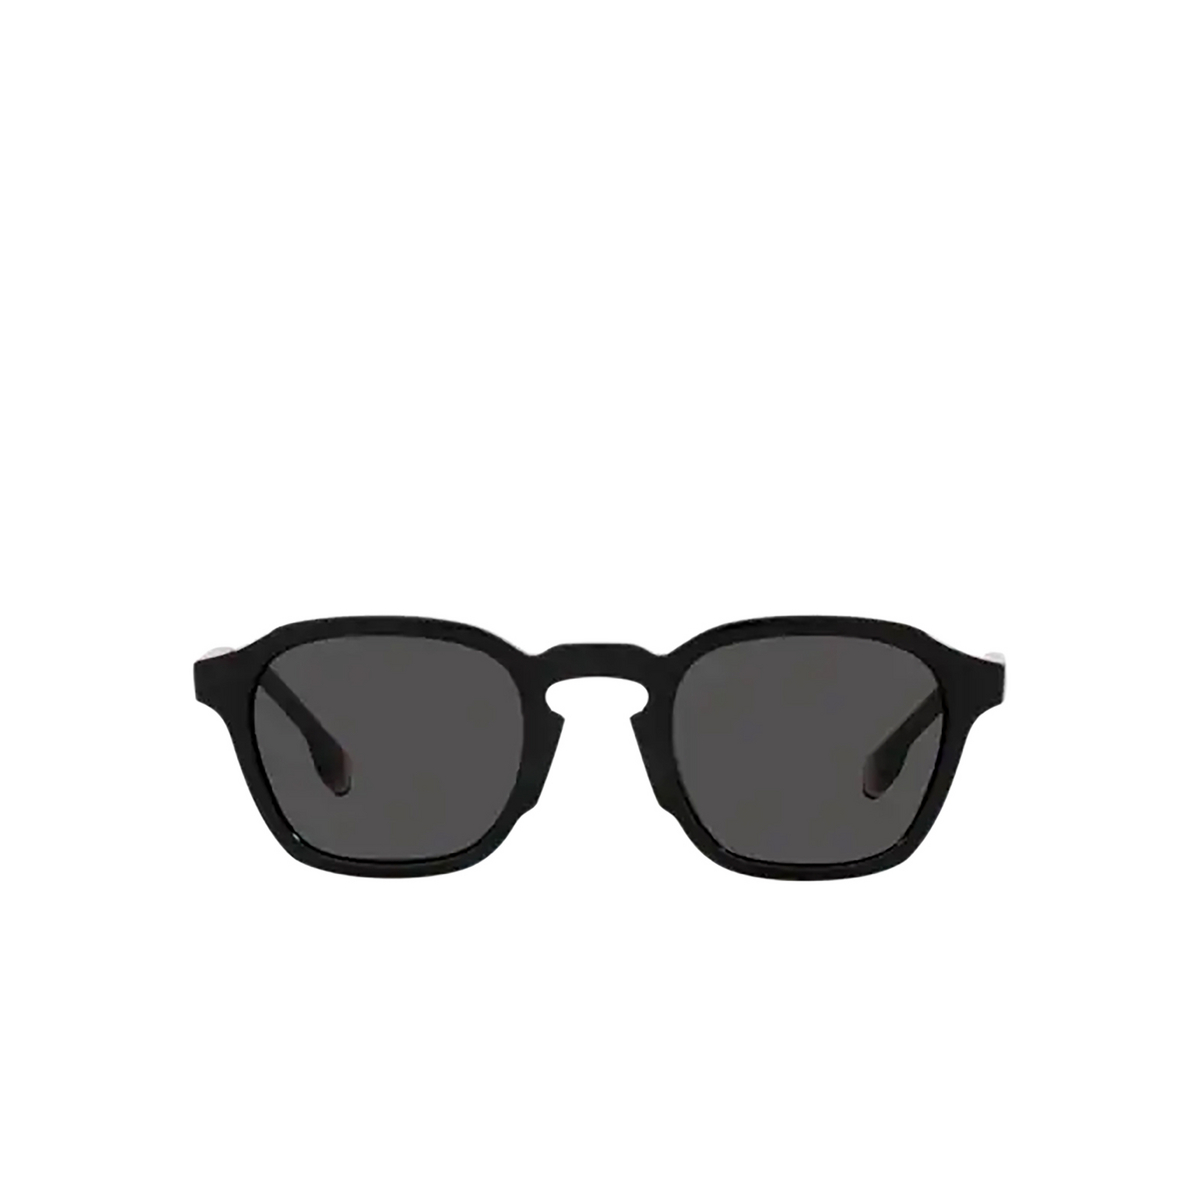 Burberry PERCY Sunglasses 300187 Black - front view